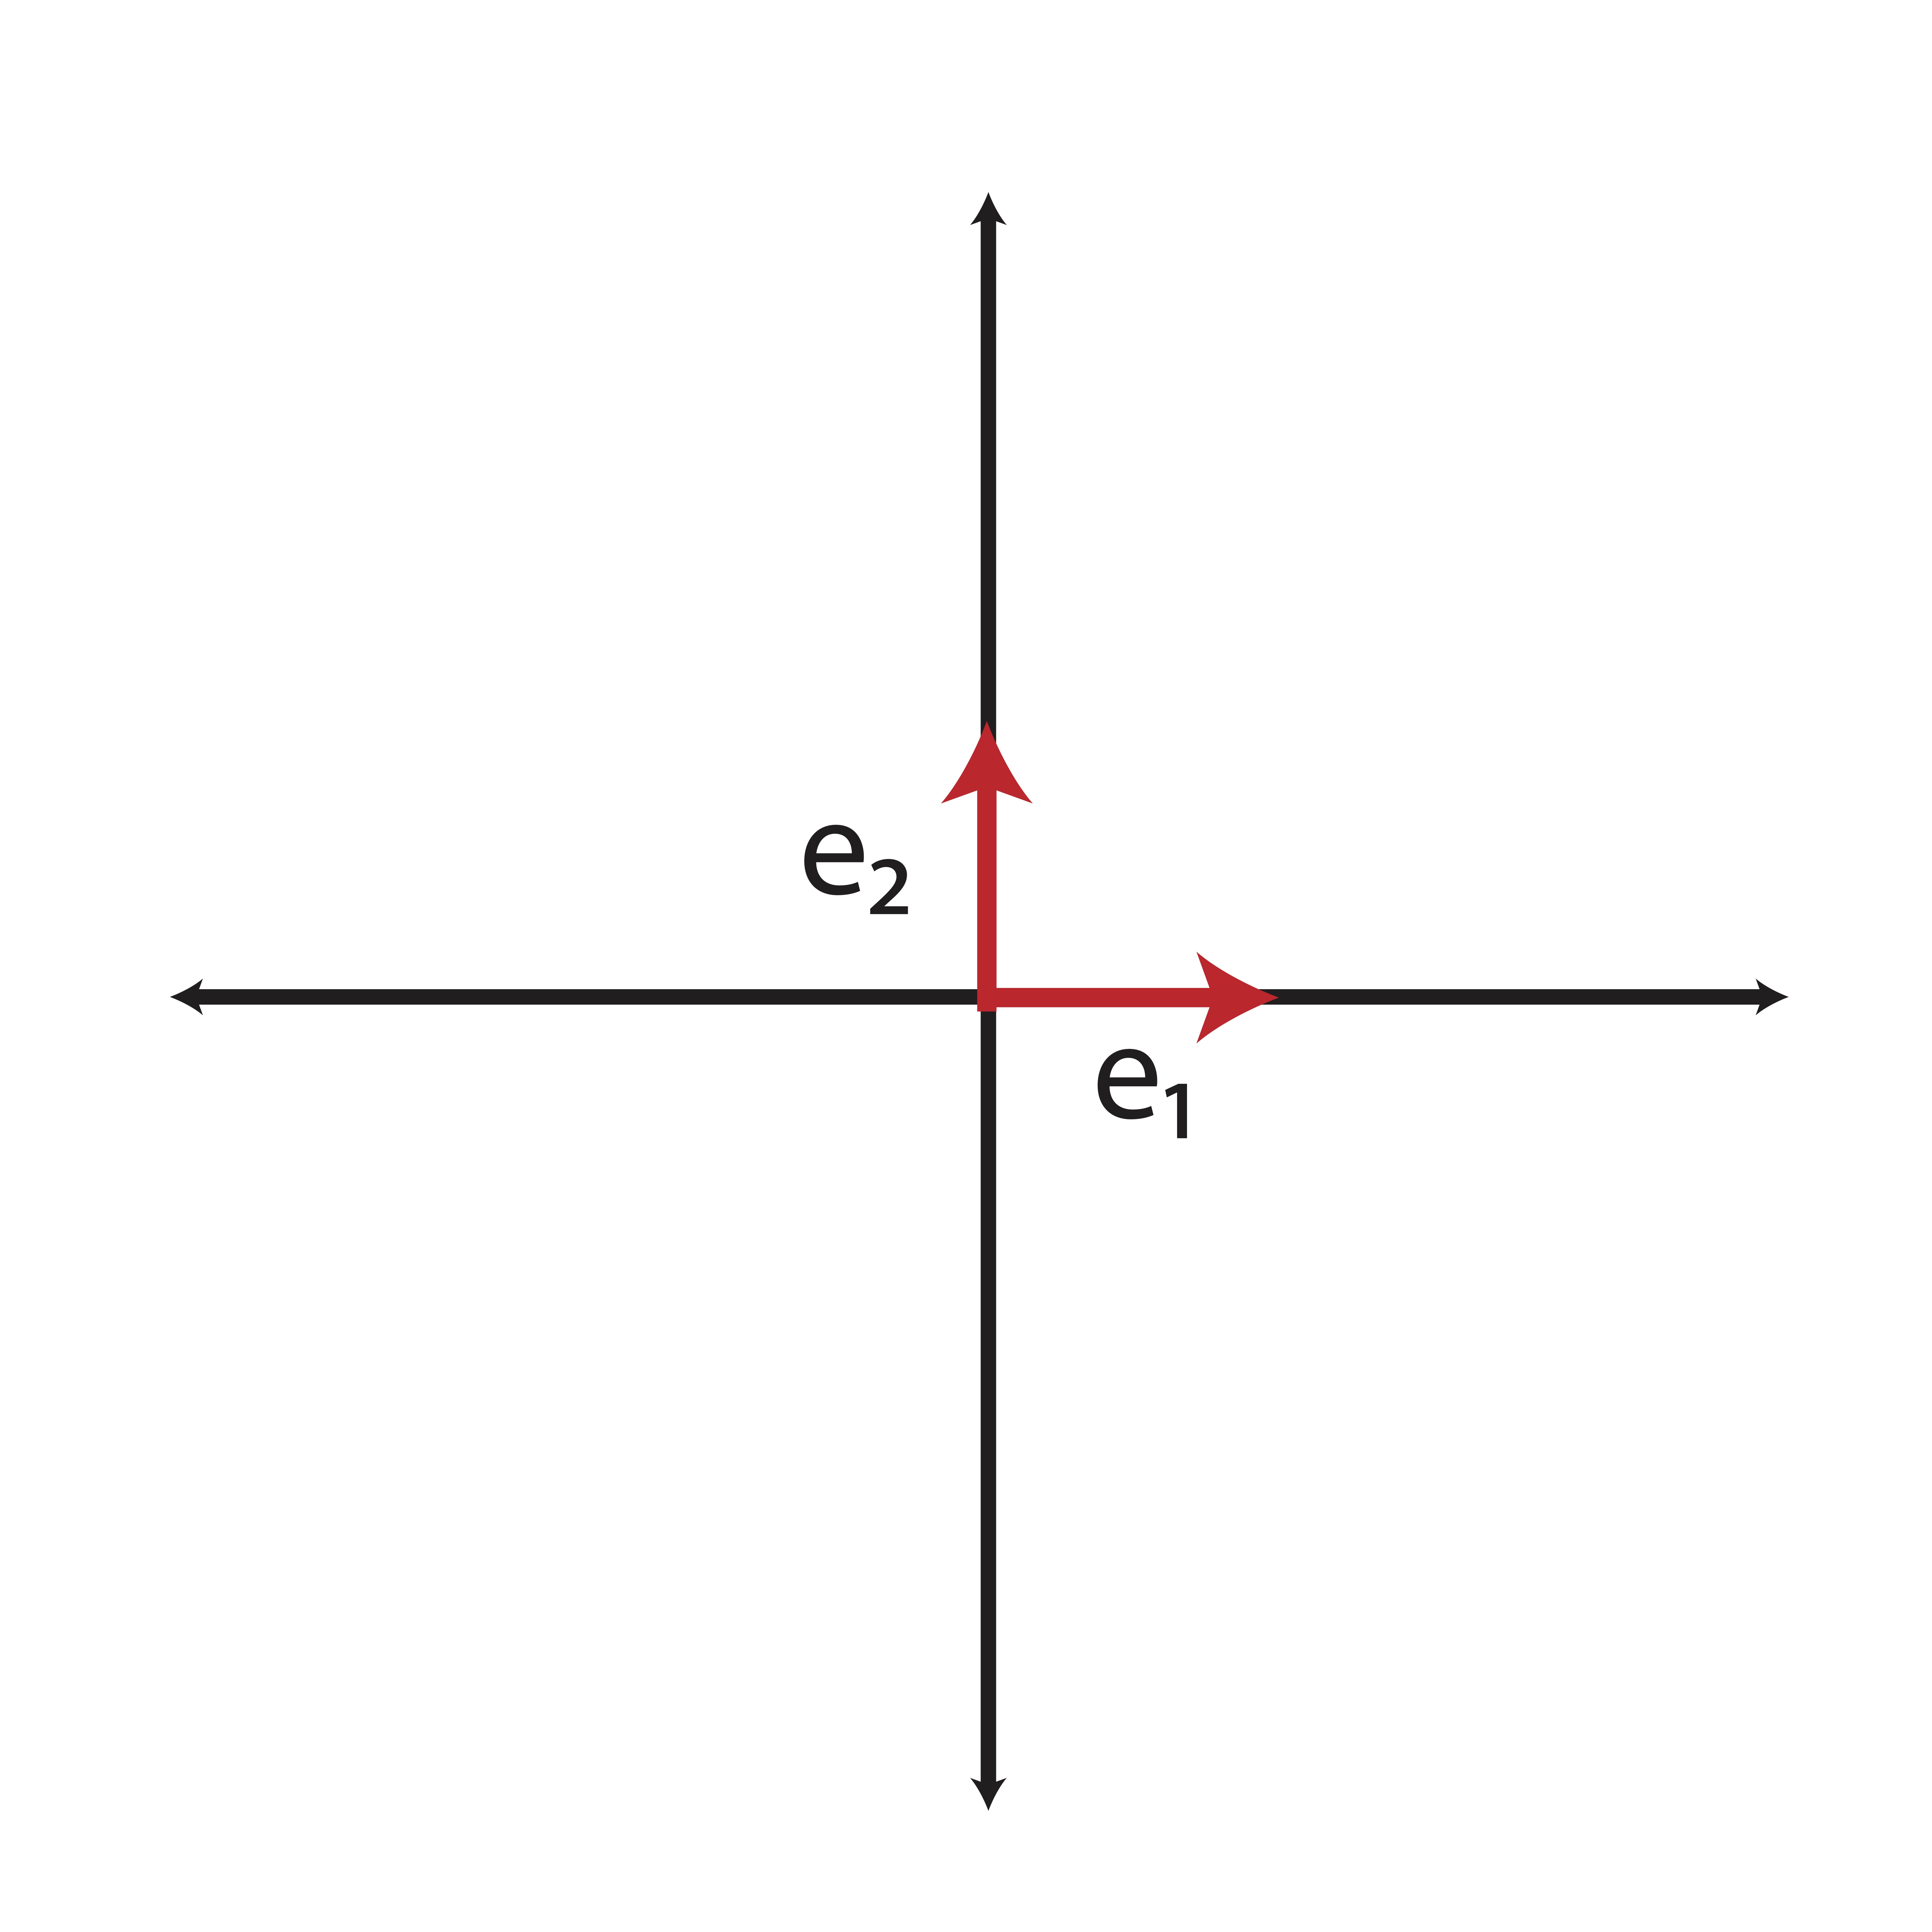 Elementary cectors represent our "usual" coordinate axes